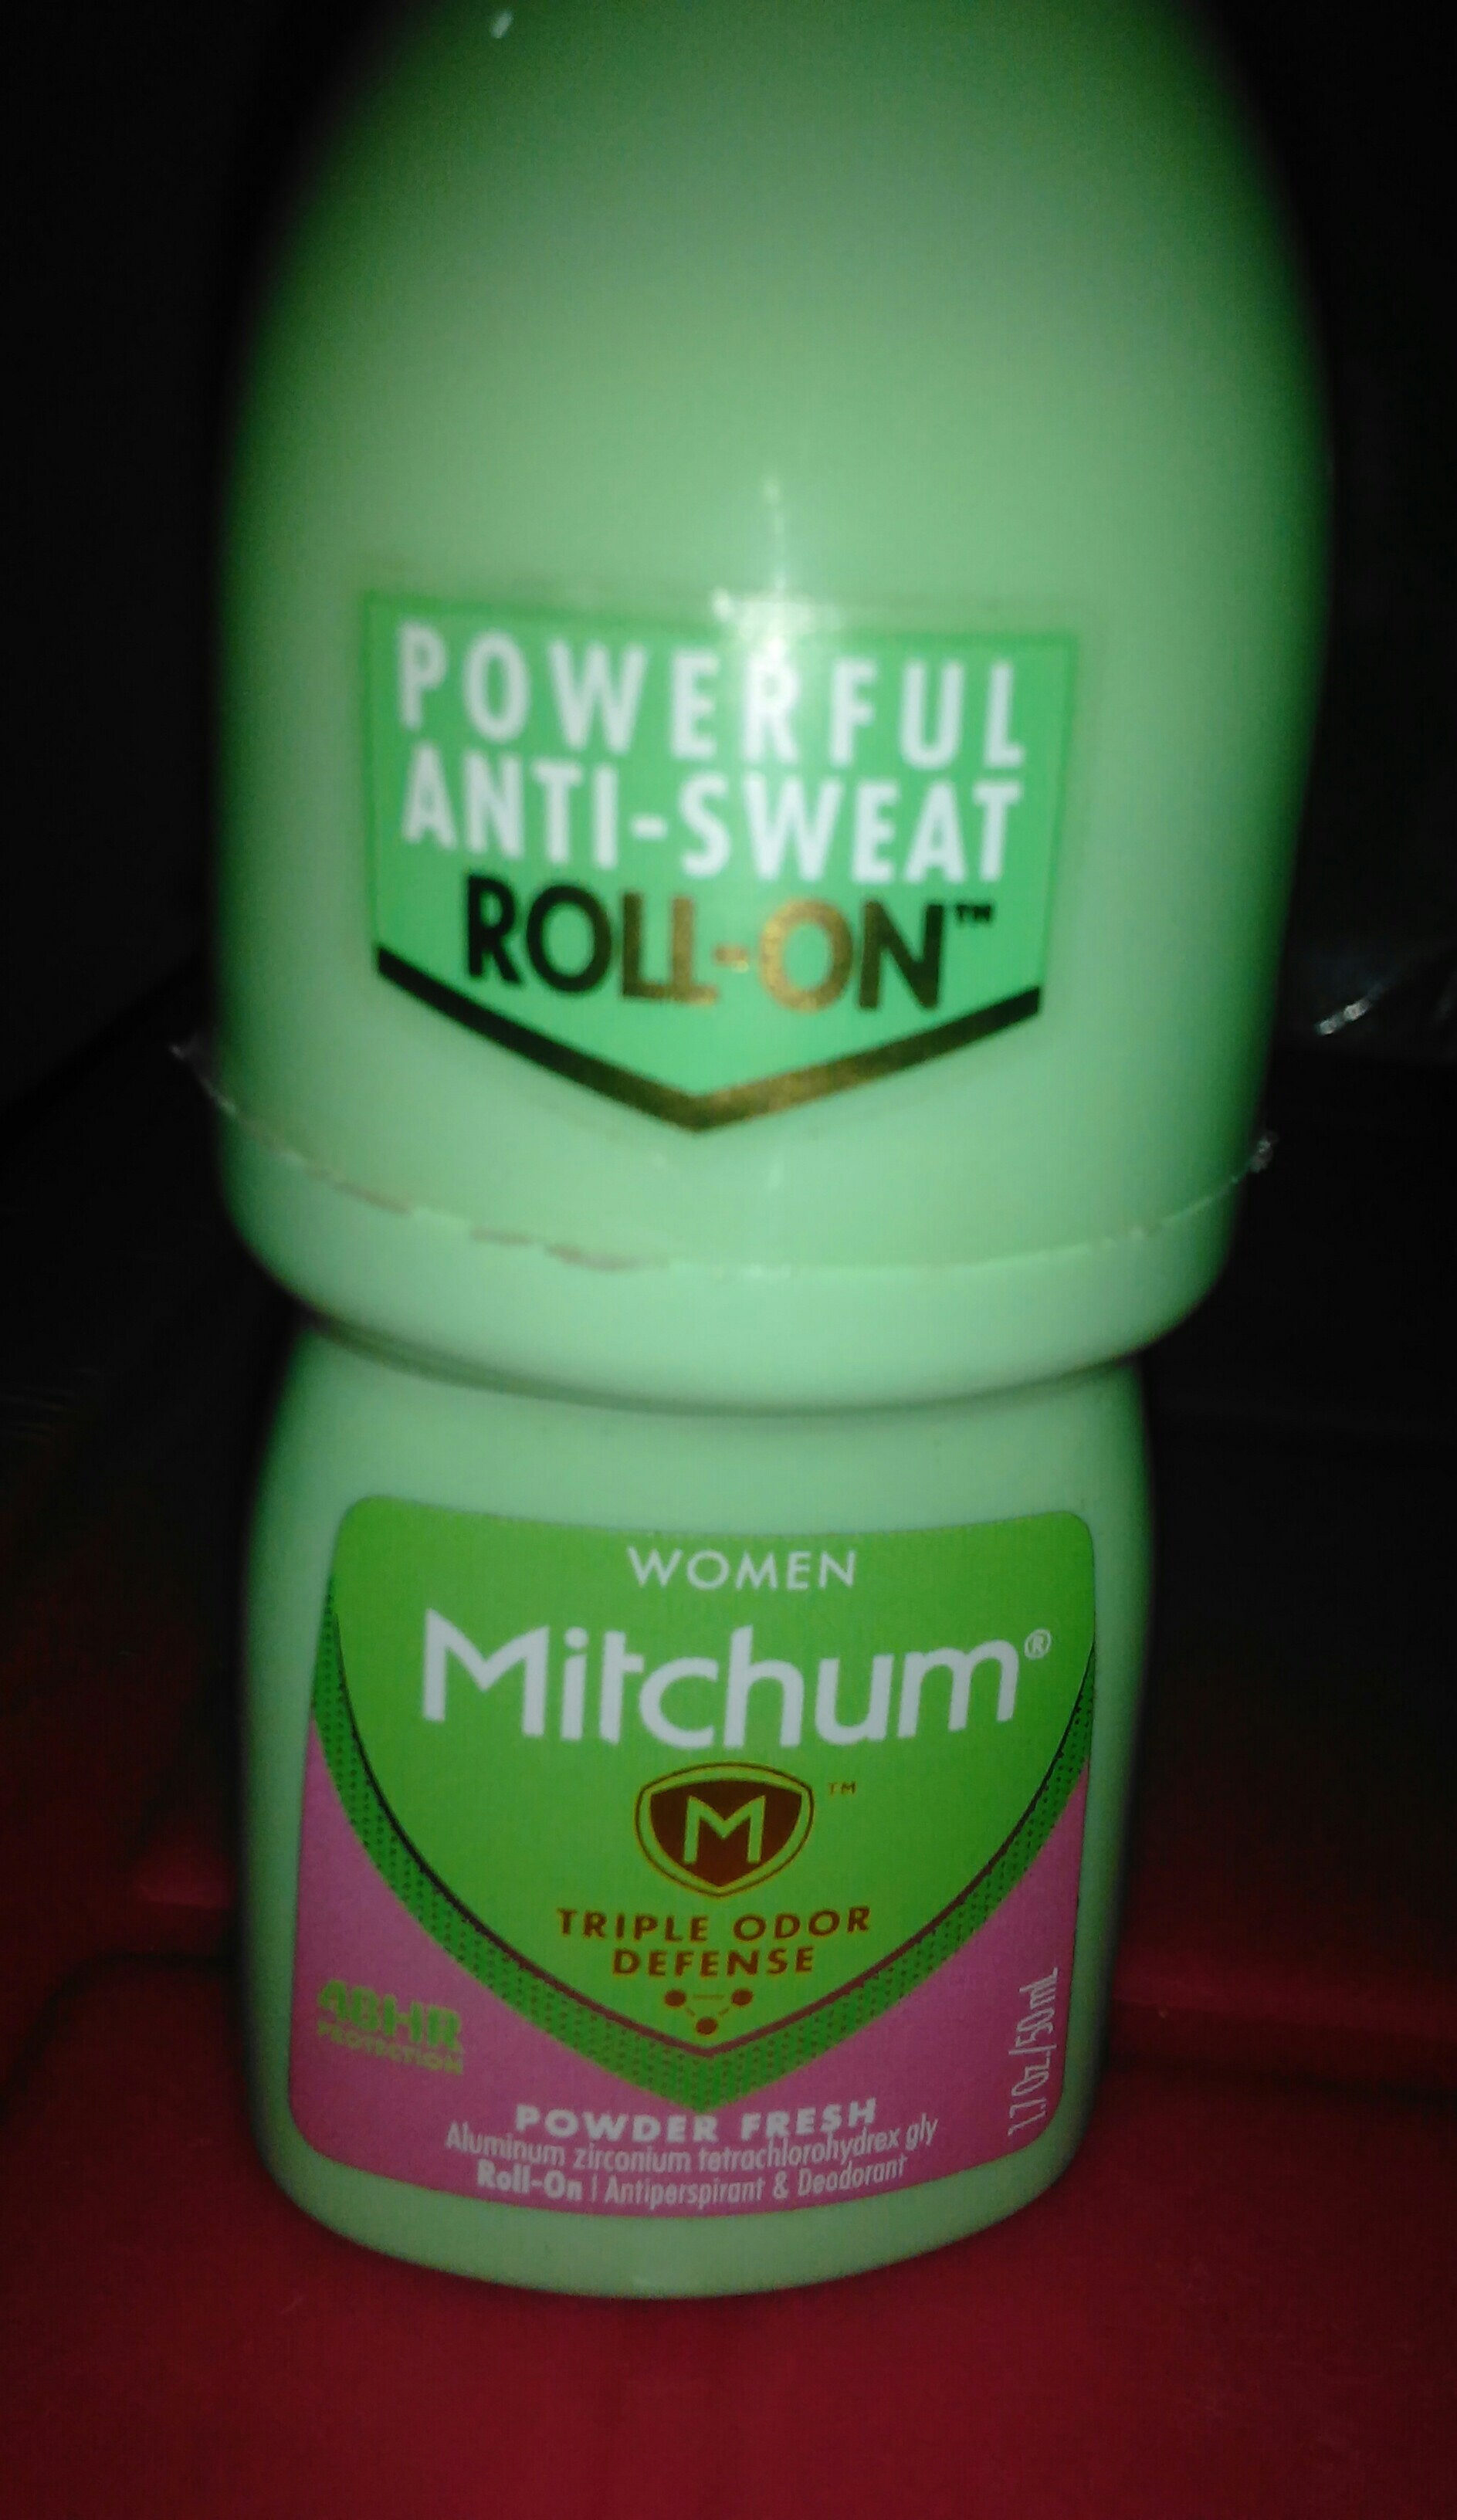 powerful anti-sweat roll-on - Tuote - es